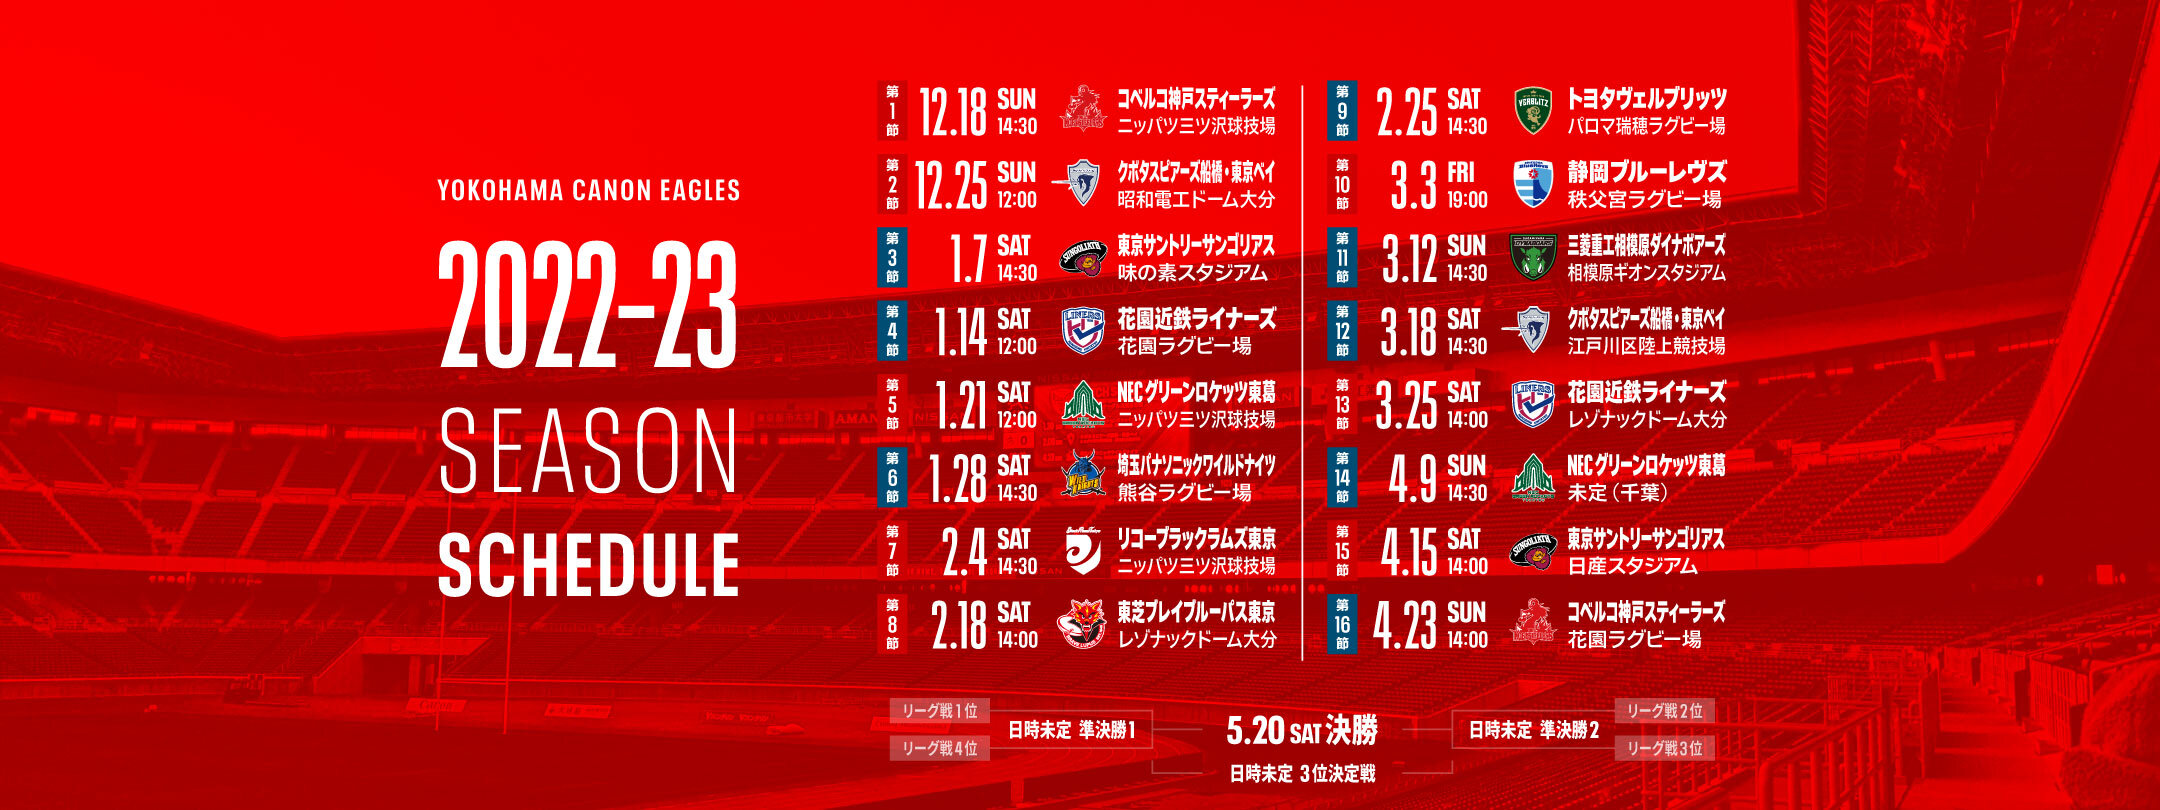 NTT JAPAN RUGBY LEAGUE ONE 2022-23 SCHEDULE